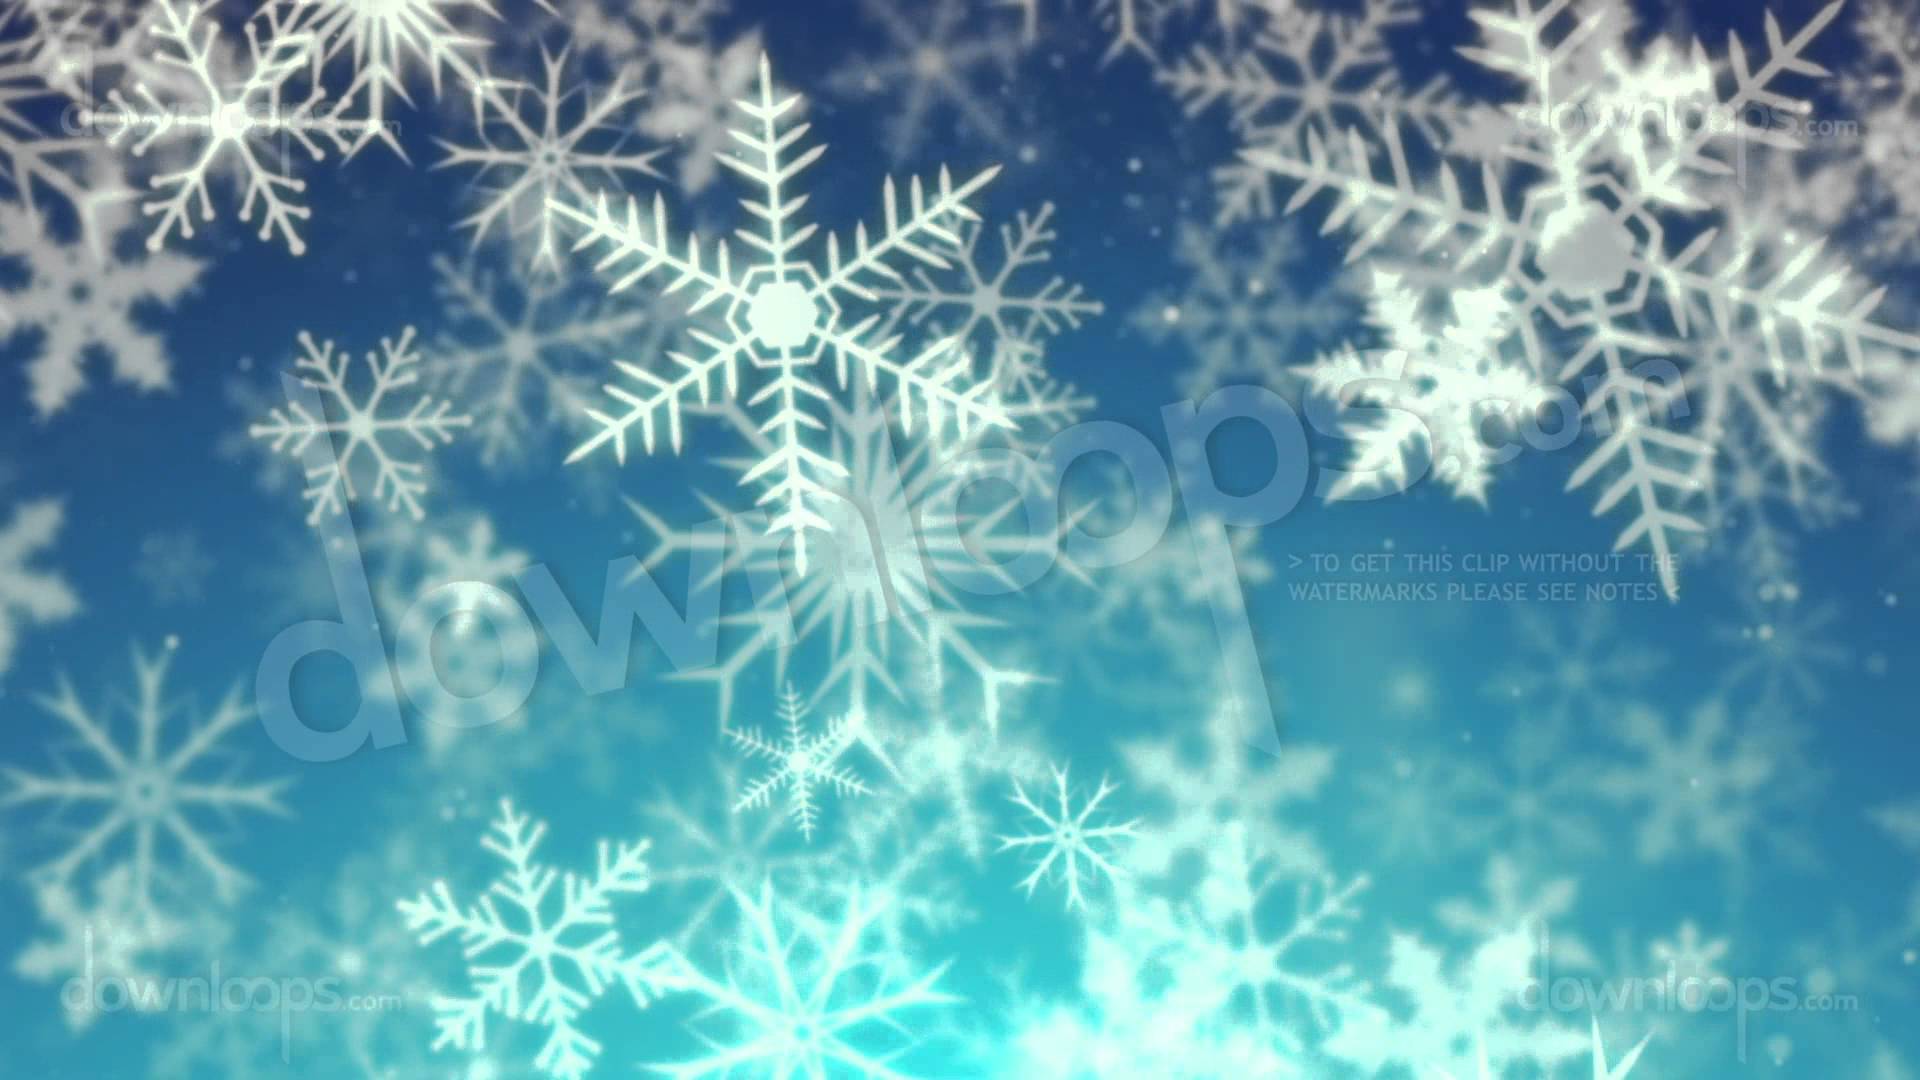 Snowy Snow Christmas Video Loop Animated Motion Background